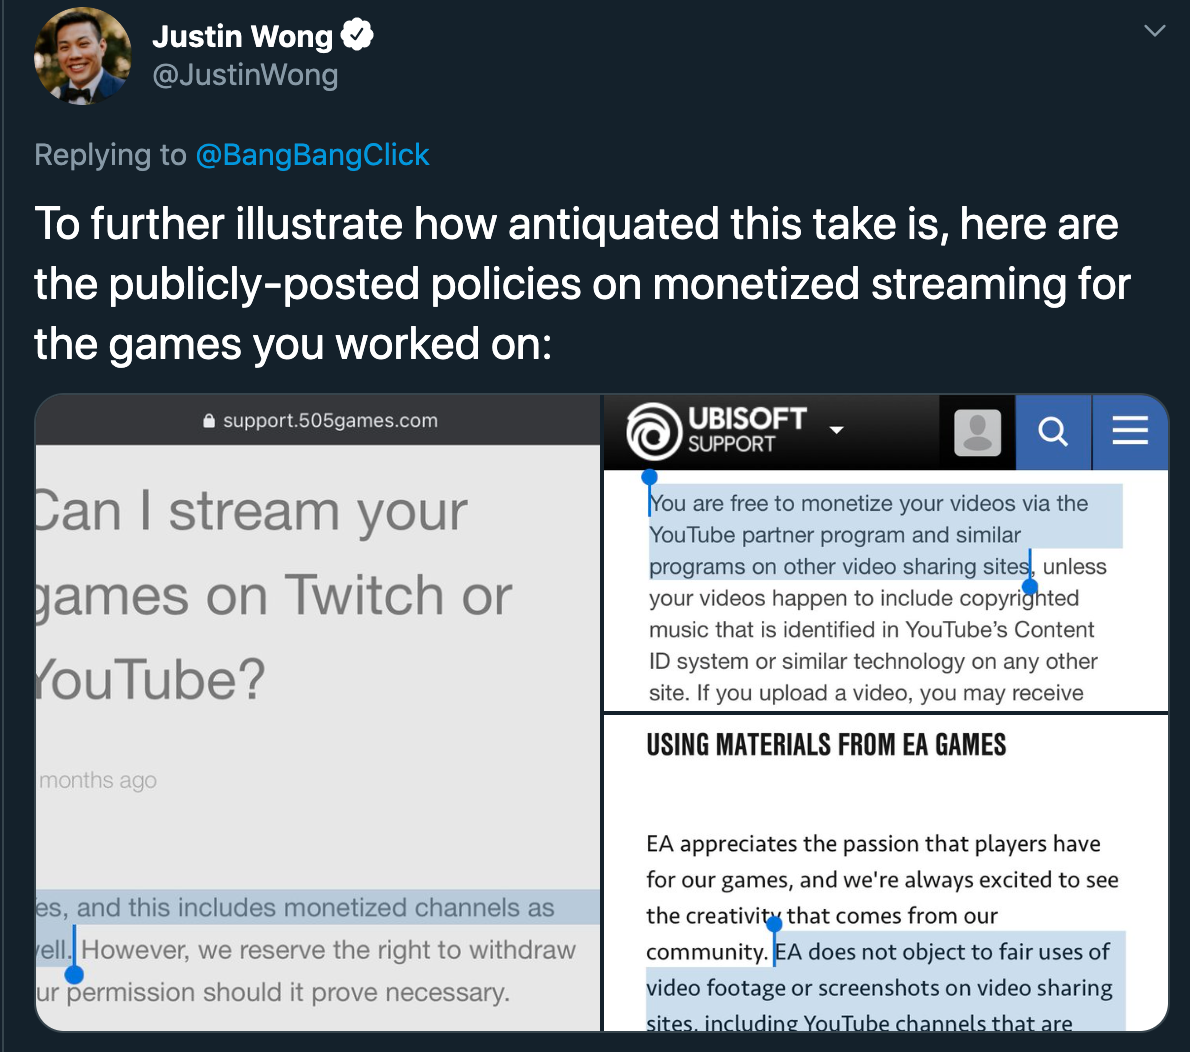 alex hutchinson video game developer streamer royalties - To further illustrate how antiquated this take is, here are the publiclyposted policies on monetized streaming for the games you worked on support.505games.com Ubisoft Support Can I stream your You